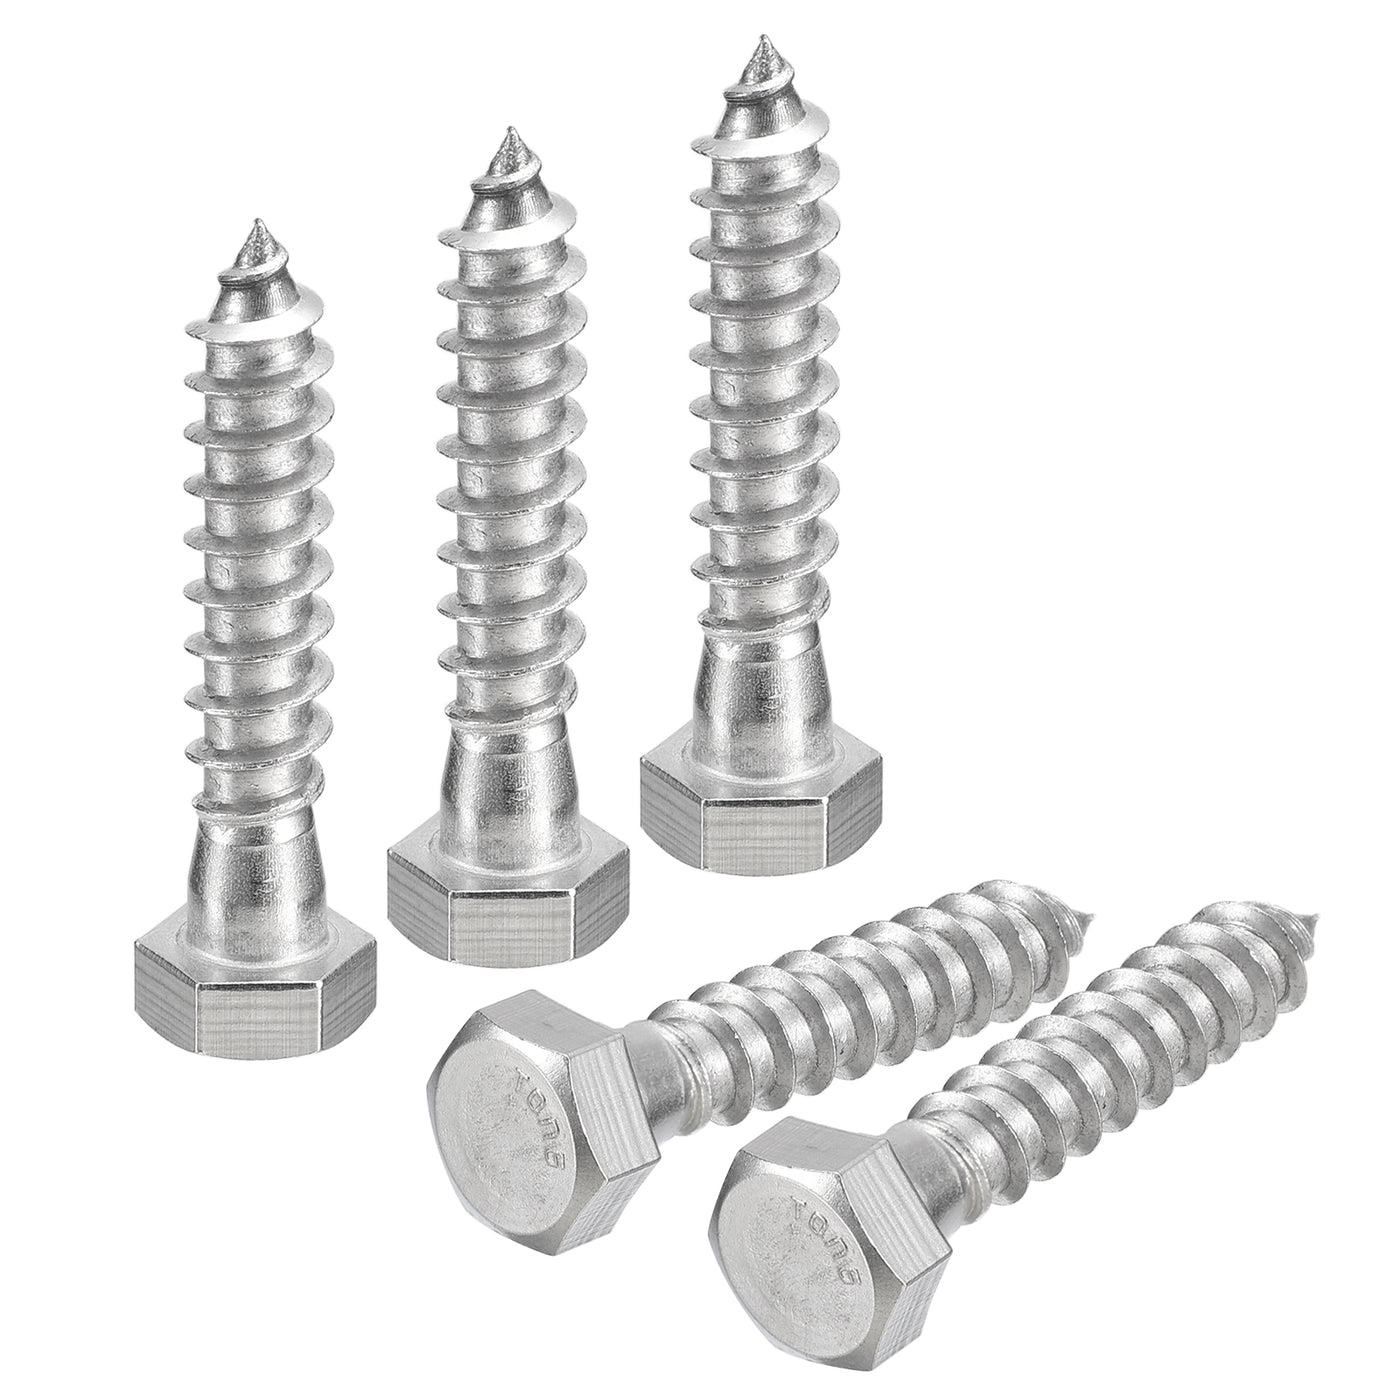 uxcell Uxcell Hex Head Lag Screws Bolts, 10pcs 3/8" x 2" 304 Stainless Steel Wood Screws